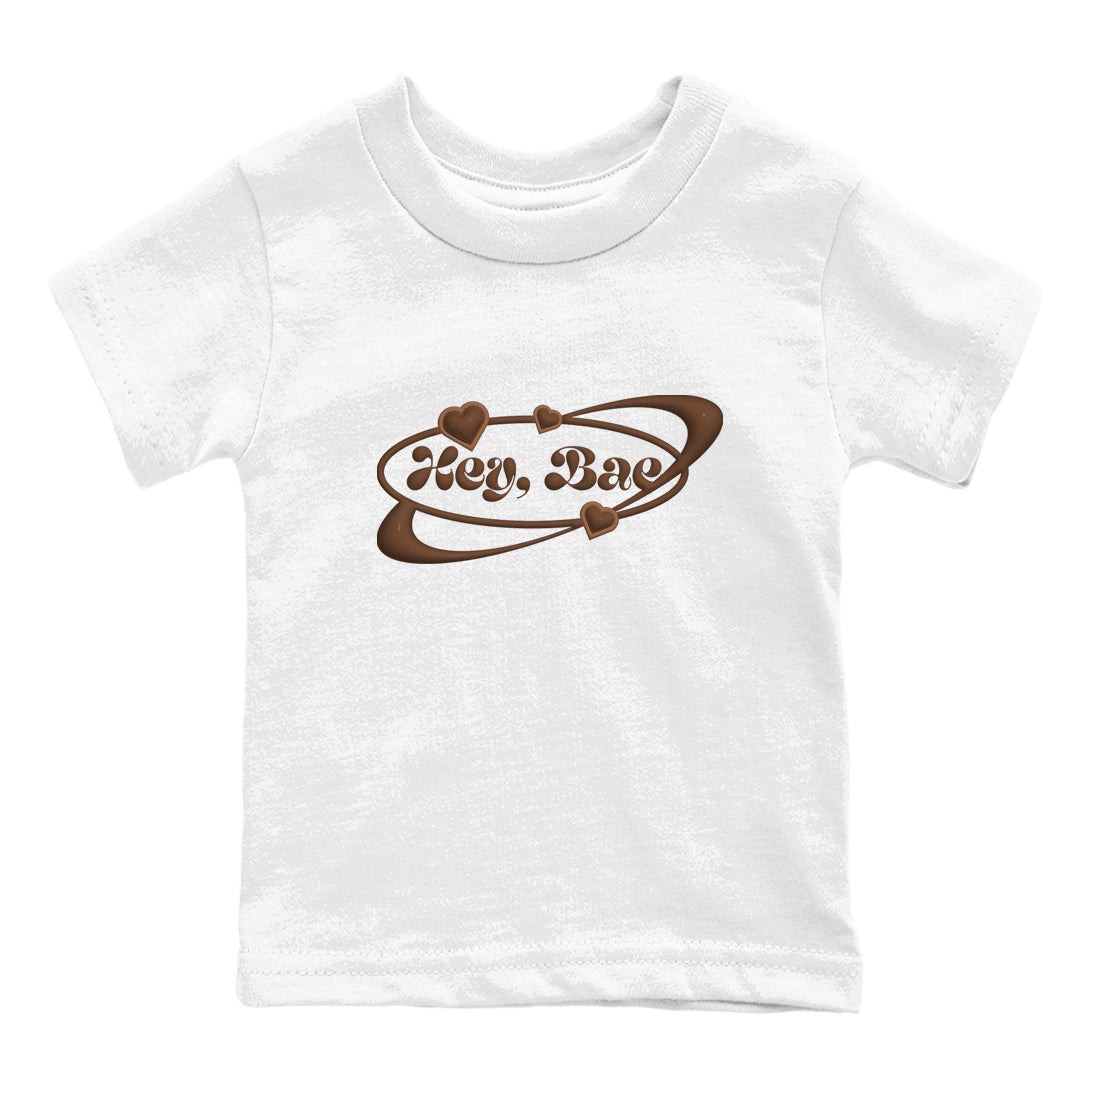 Dunk Cacao Wow shirt to match jordans Hey Bae sneaker tees Nike Dunk Cacao Wow SNRT Sneaker Release Tees Baby Toddler White 2 T-Shirt